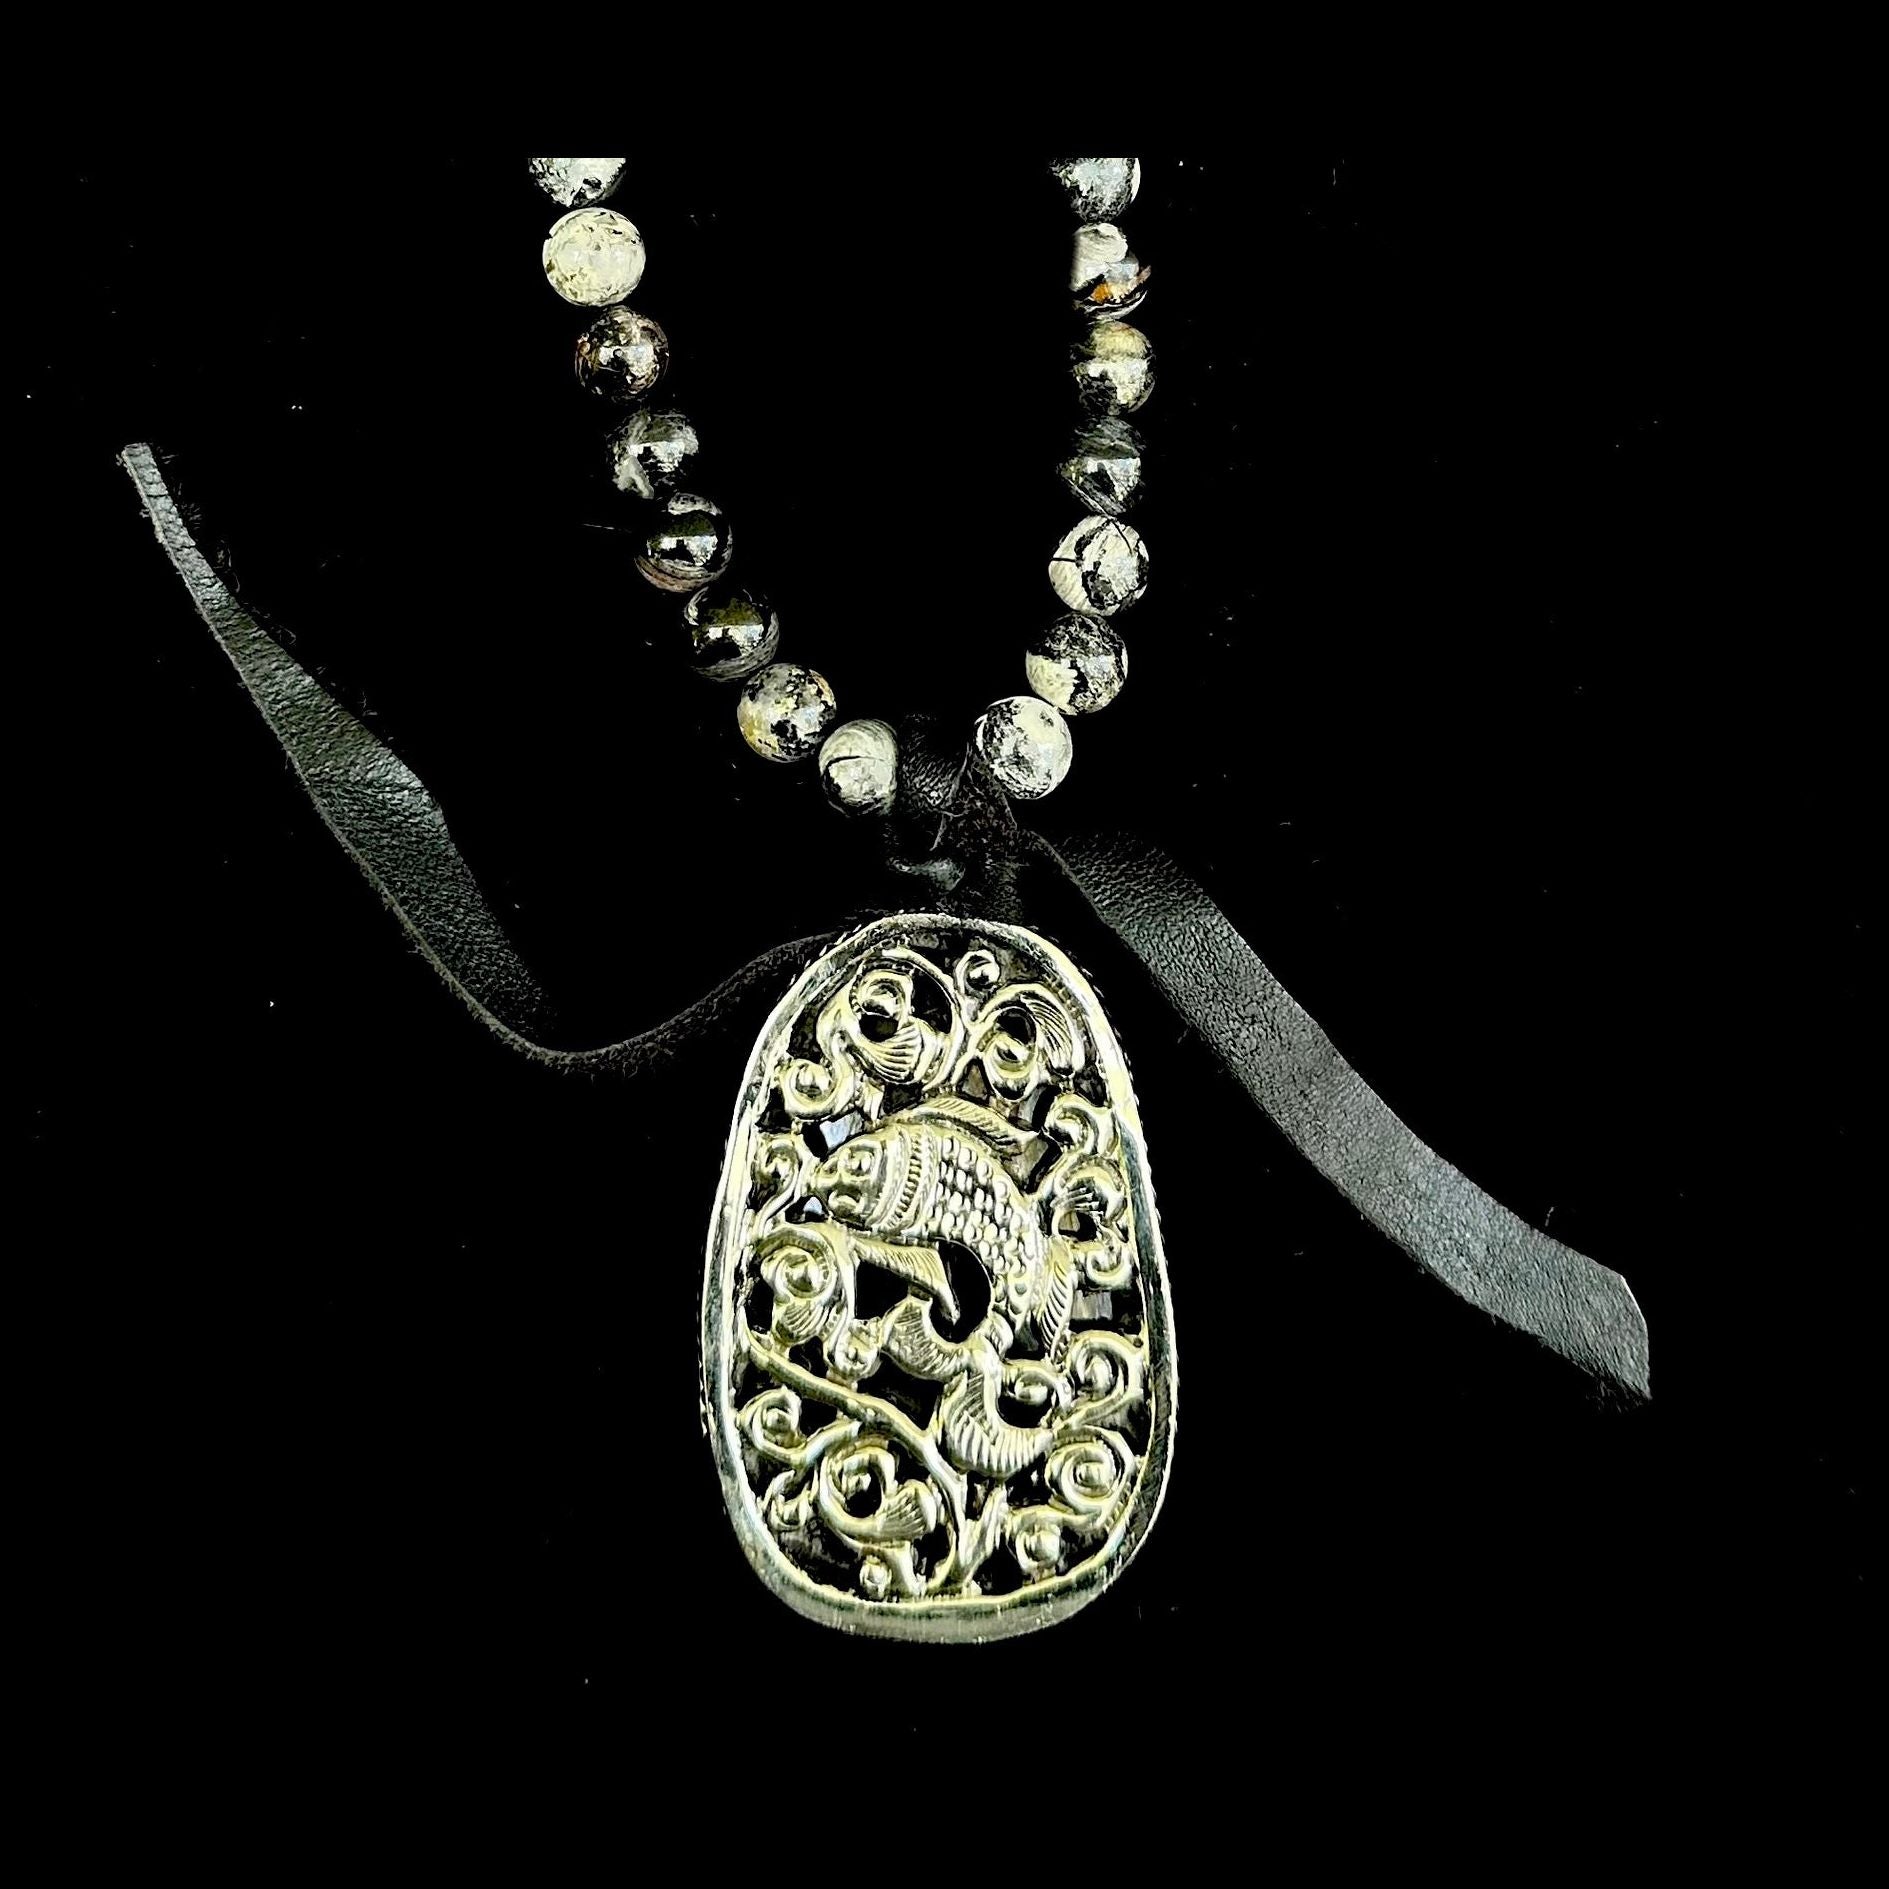 Limited Edition Carved Repousse White Tara in Black Obsidian & Silver Leaf Jasper Necklace